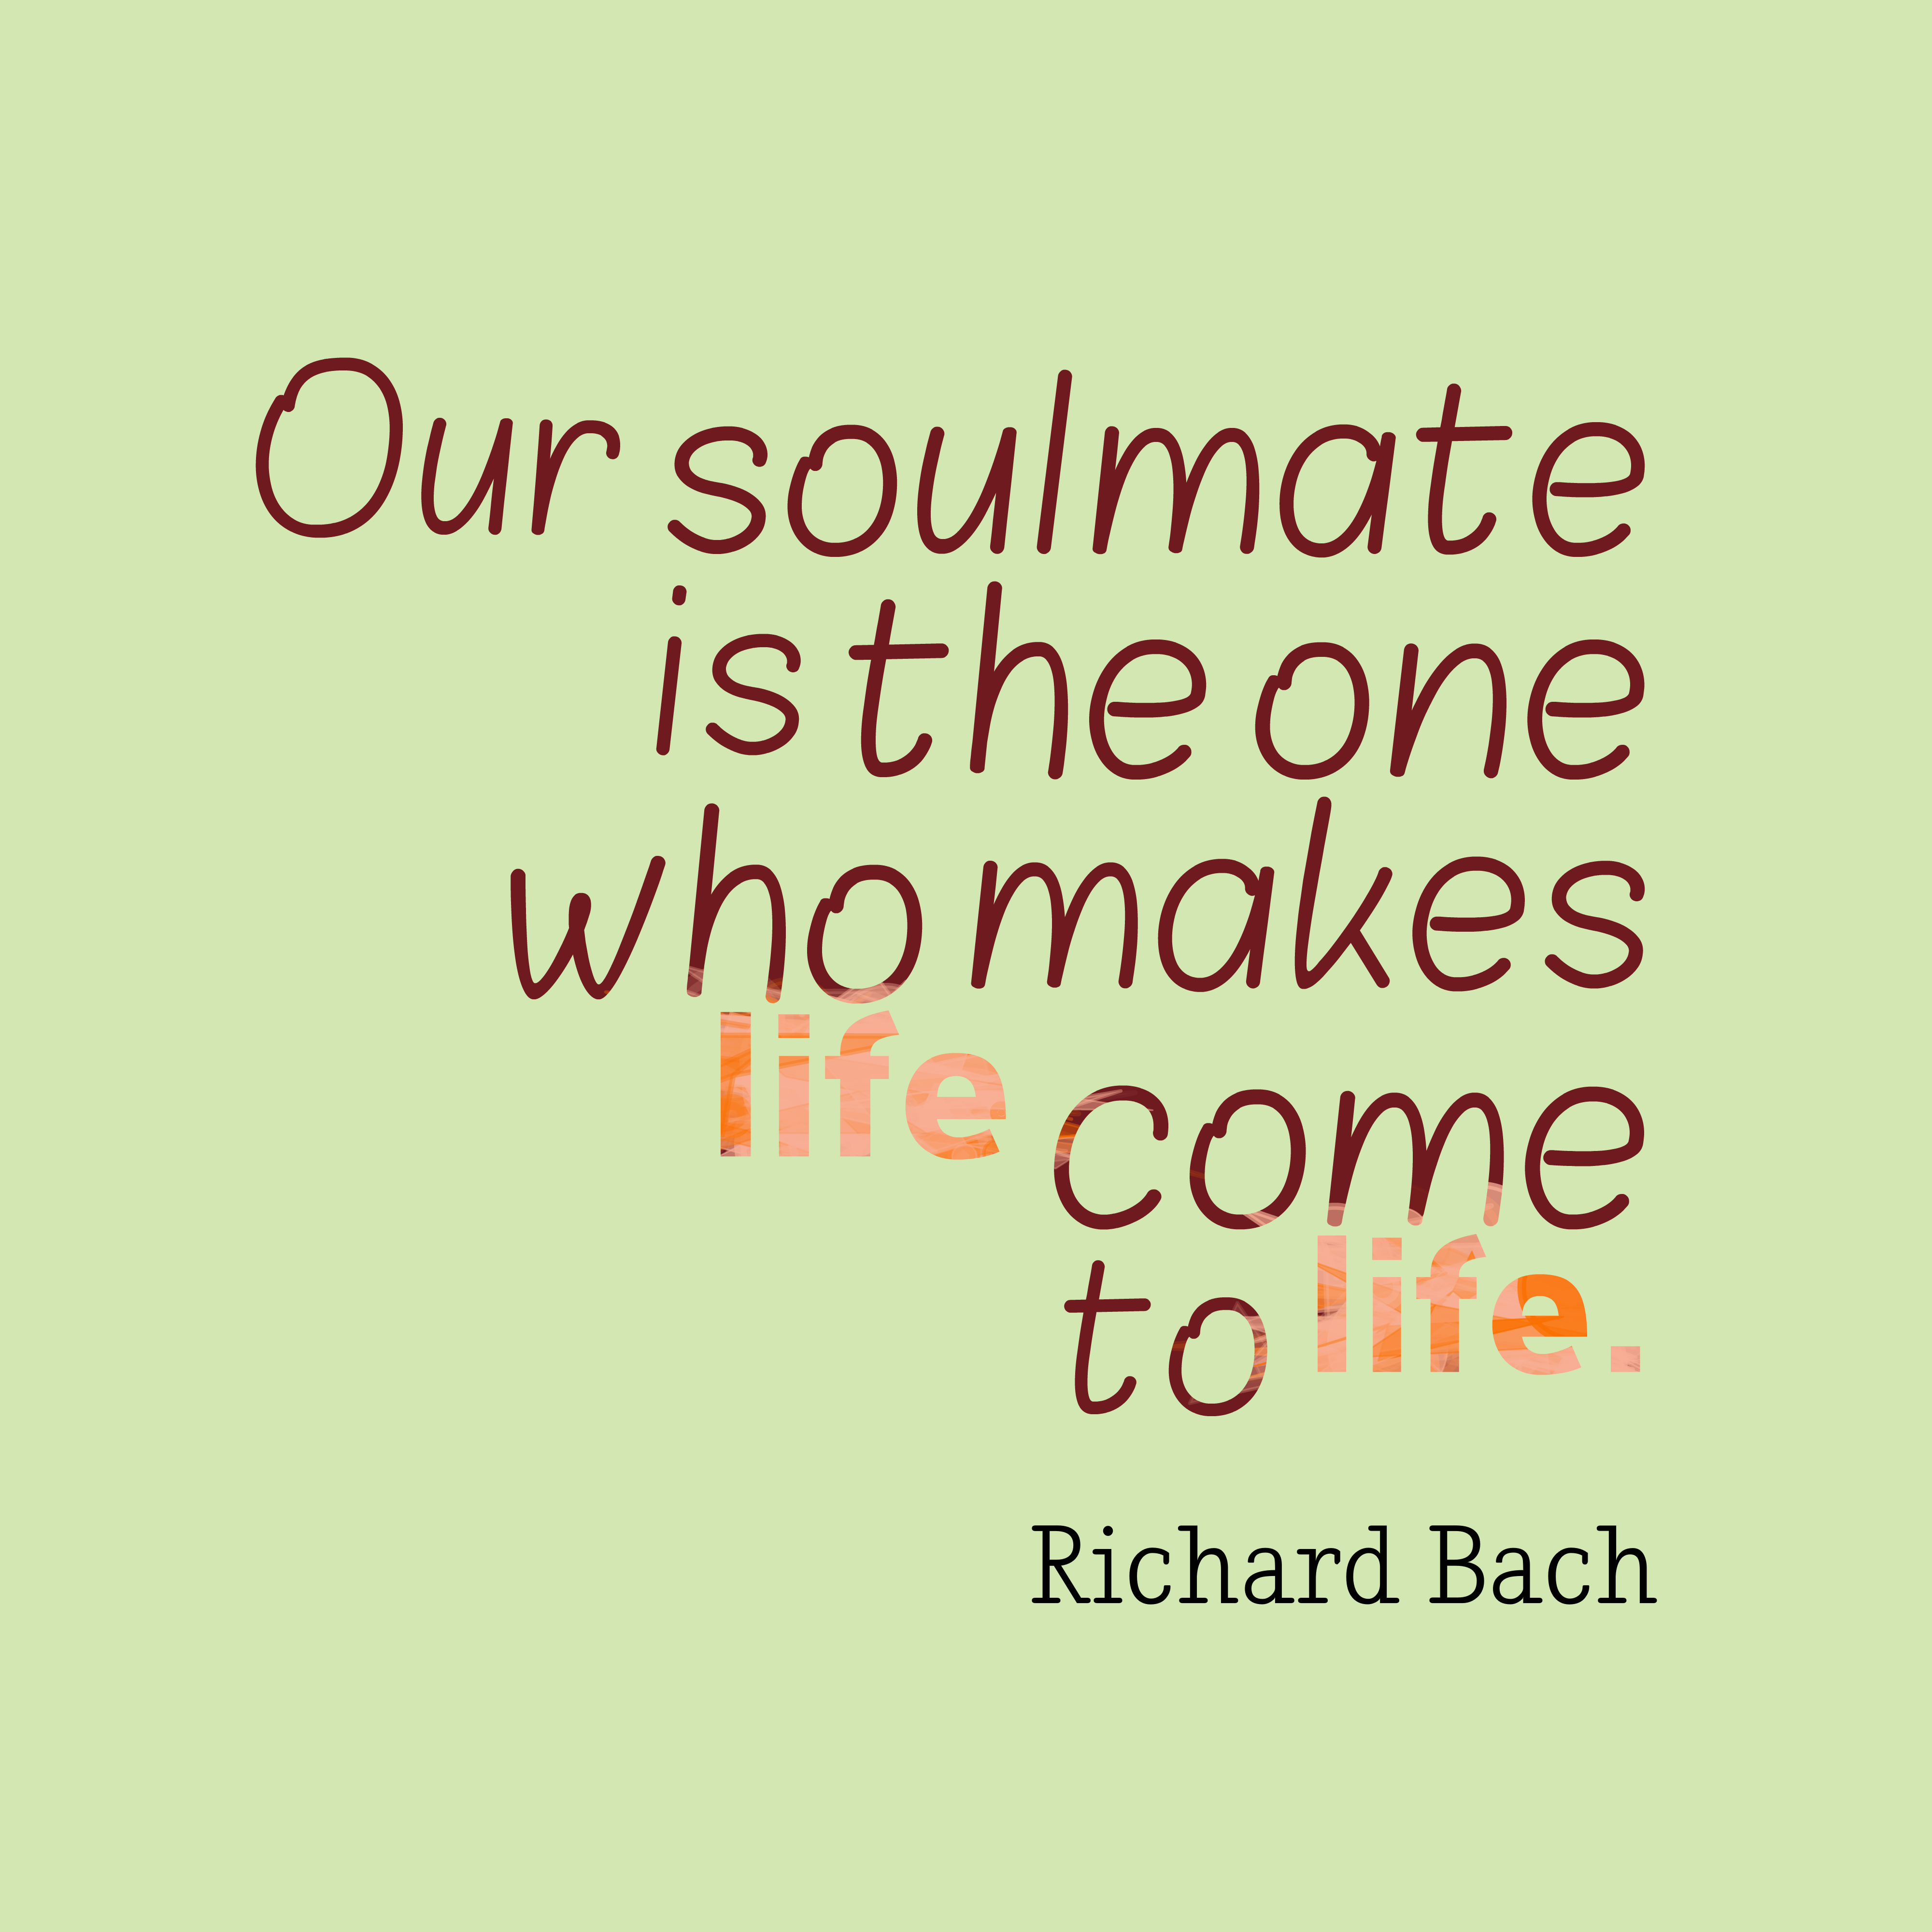 50+ Soul mate Quotes, Wishes